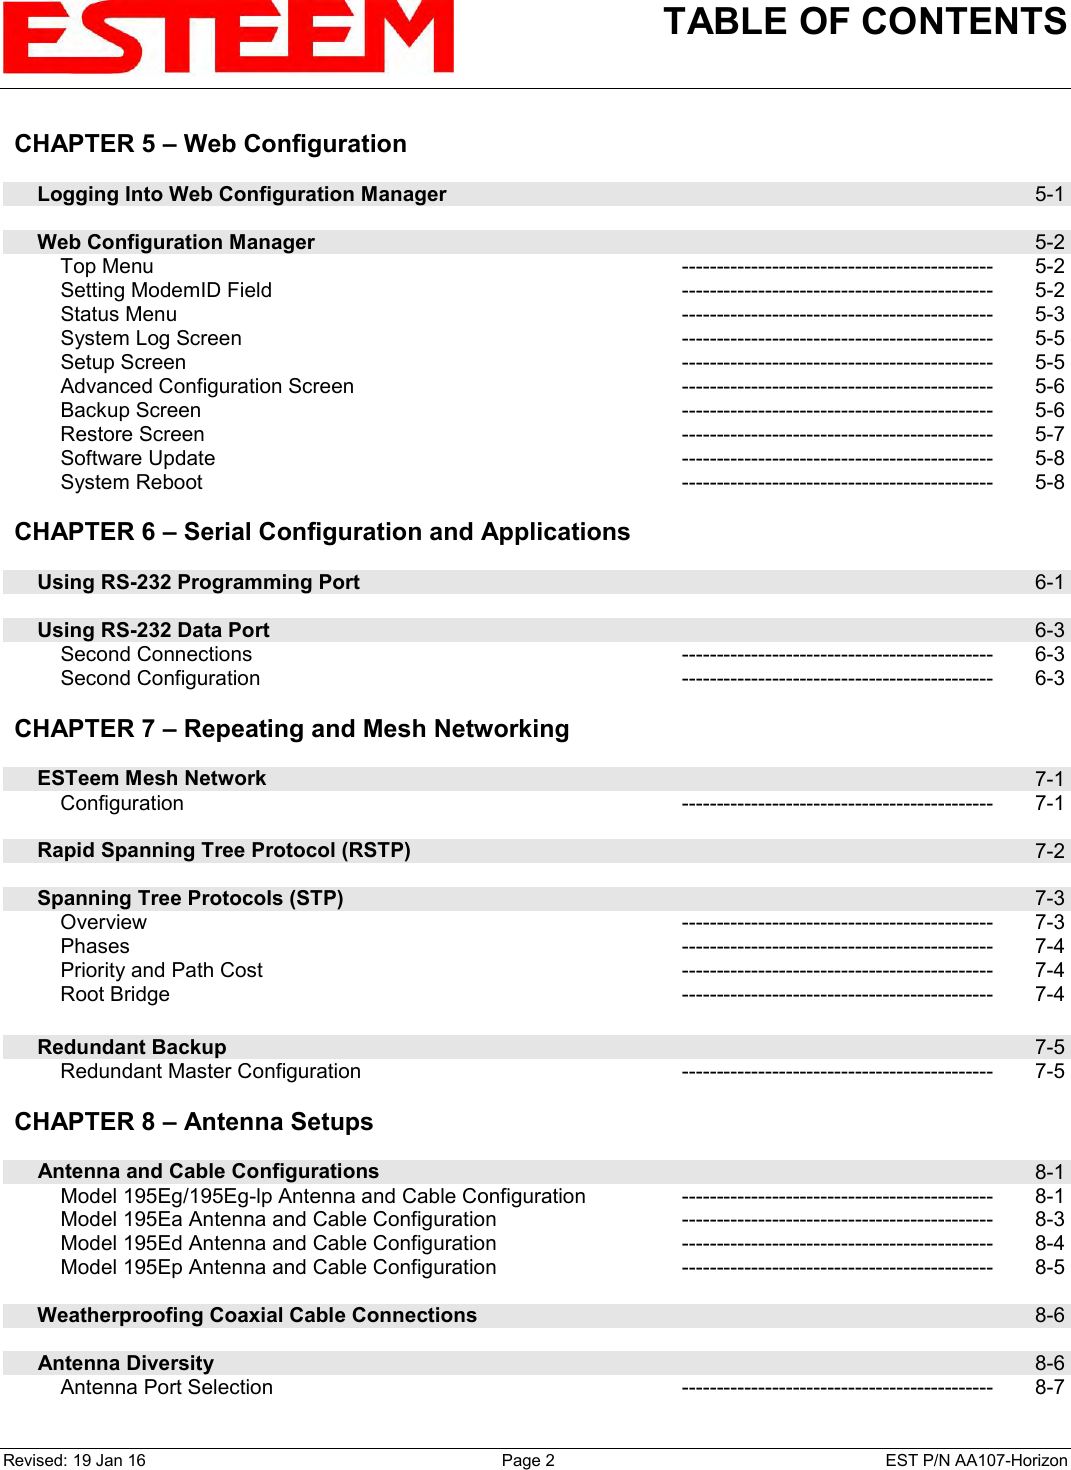 TABLE OF CONTENTS    Revised: 19 Jan 16  Page 2  EST P/N AA107-Horizon CHAPTER 5 – Web Configuration          Logging Into Web Configuration Manager  5-1        Web Configuration Manager  5-2         Top Menu --------------------------------------------- 5-2         Setting ModemID Field --------------------------------------------- 5-2         Status Menu --------------------------------------------- 5-3         System Log Screen --------------------------------------------- 5-5         Setup Screen --------------------------------------------- 5-5         Advanced Configuration Screen --------------------------------------------- 5-6         Backup Screen --------------------------------------------- 5-6         Restore Screen --------------------------------------------- 5-7         Software Update --------------------------------------------- 5-8         System Reboot --------------------------------------------- 5-8    CHAPTER 6 – Serial Configuration and Applications          Using RS-232 Programming Port  6-1        Using RS-232 Data Port  6-3         Second Connections --------------------------------------------- 6-3         Second Configuration --------------------------------------------- 6-3    CHAPTER 7 – Repeating and Mesh Networking          ESTeem Mesh Network  7-1         Configuration --------------------------------------------- 7-1        Rapid Spanning Tree Protocol (RSTP)  7-2        Spanning Tree Protocols (STP)  7-3         Overview --------------------------------------------- 7-3         Phases --------------------------------------------- 7-4         Priority and Path Cost --------------------------------------------- 7-4         Root Bridge --------------------------------------------- 7-4        Redundant Backup  7-5         Redundant Master Configuration --------------------------------------------- 7-5    CHAPTER 8 – Antenna Setups          Antenna and Cable Configurations  8-1         Model 195Eg/195Eg-lp Antenna and Cable Configuration --------------------------------------------- 8-1         Model 195Ea Antenna and Cable Configuration --------------------------------------------- 8-3         Model 195Ed Antenna and Cable Configuration --------------------------------------------- 8-4         Model 195Ep Antenna and Cable Configuration --------------------------------------------- 8-5        Weatherproofing Coaxial Cable Connections  8-6        Antenna Diversity  8-6         Antenna Port Selection --------------------------------------------- 8-7 